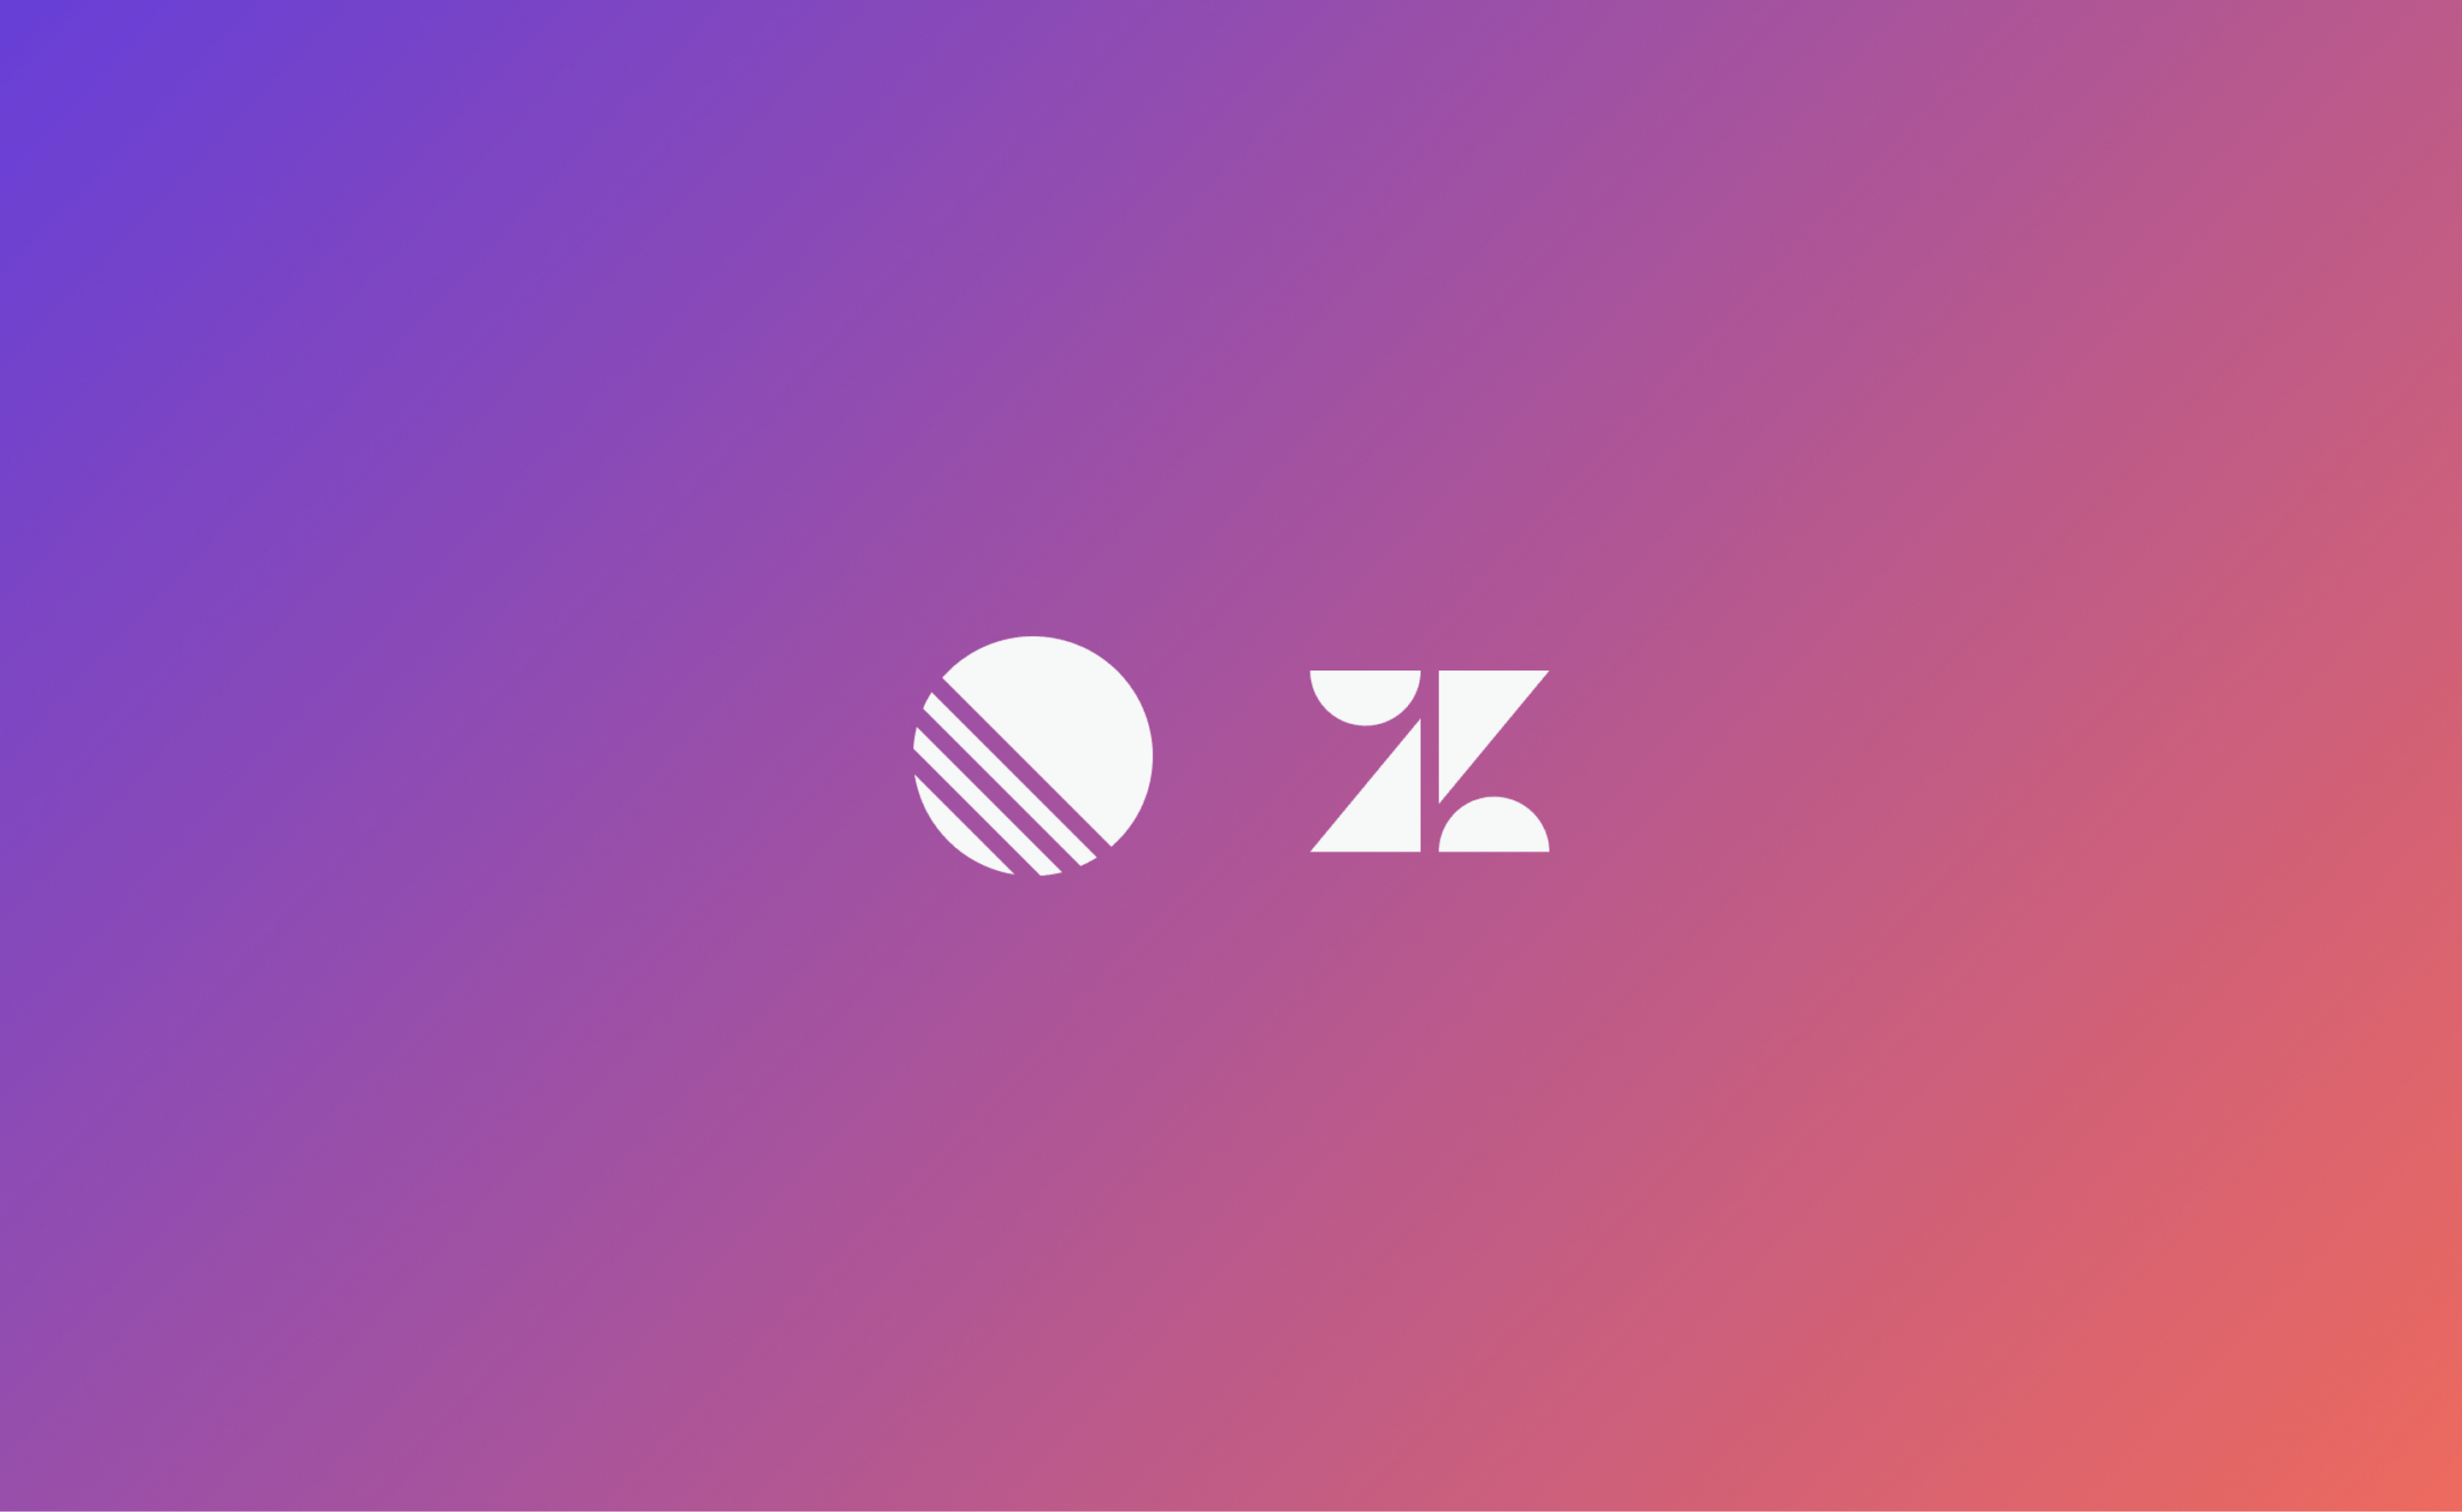 Linear and Zendesk logos